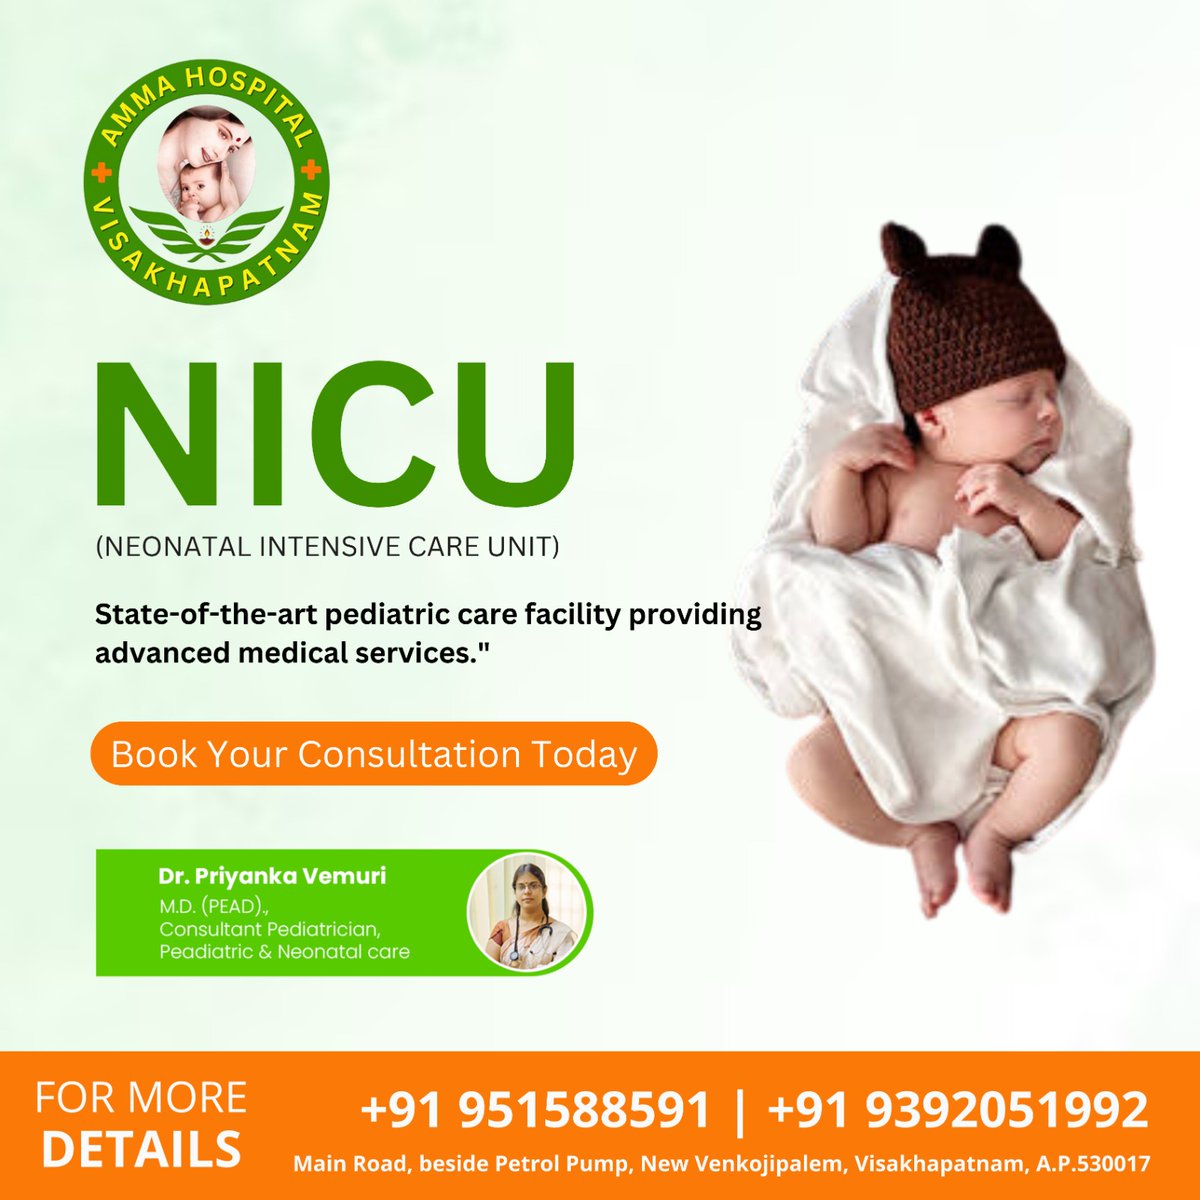 Tiny Miracles Begin & Flourish in Our Premier Neonatal Intensive Care Unit. Providing Expert Care, Comfort & Hope for Precious New Lives. 

Consult Now : +91 951588591 | +91 9392051992

#AmmaHospital #BestNeonatalCare #BestPediatricCare #BestPostnatalCare #NICUCare